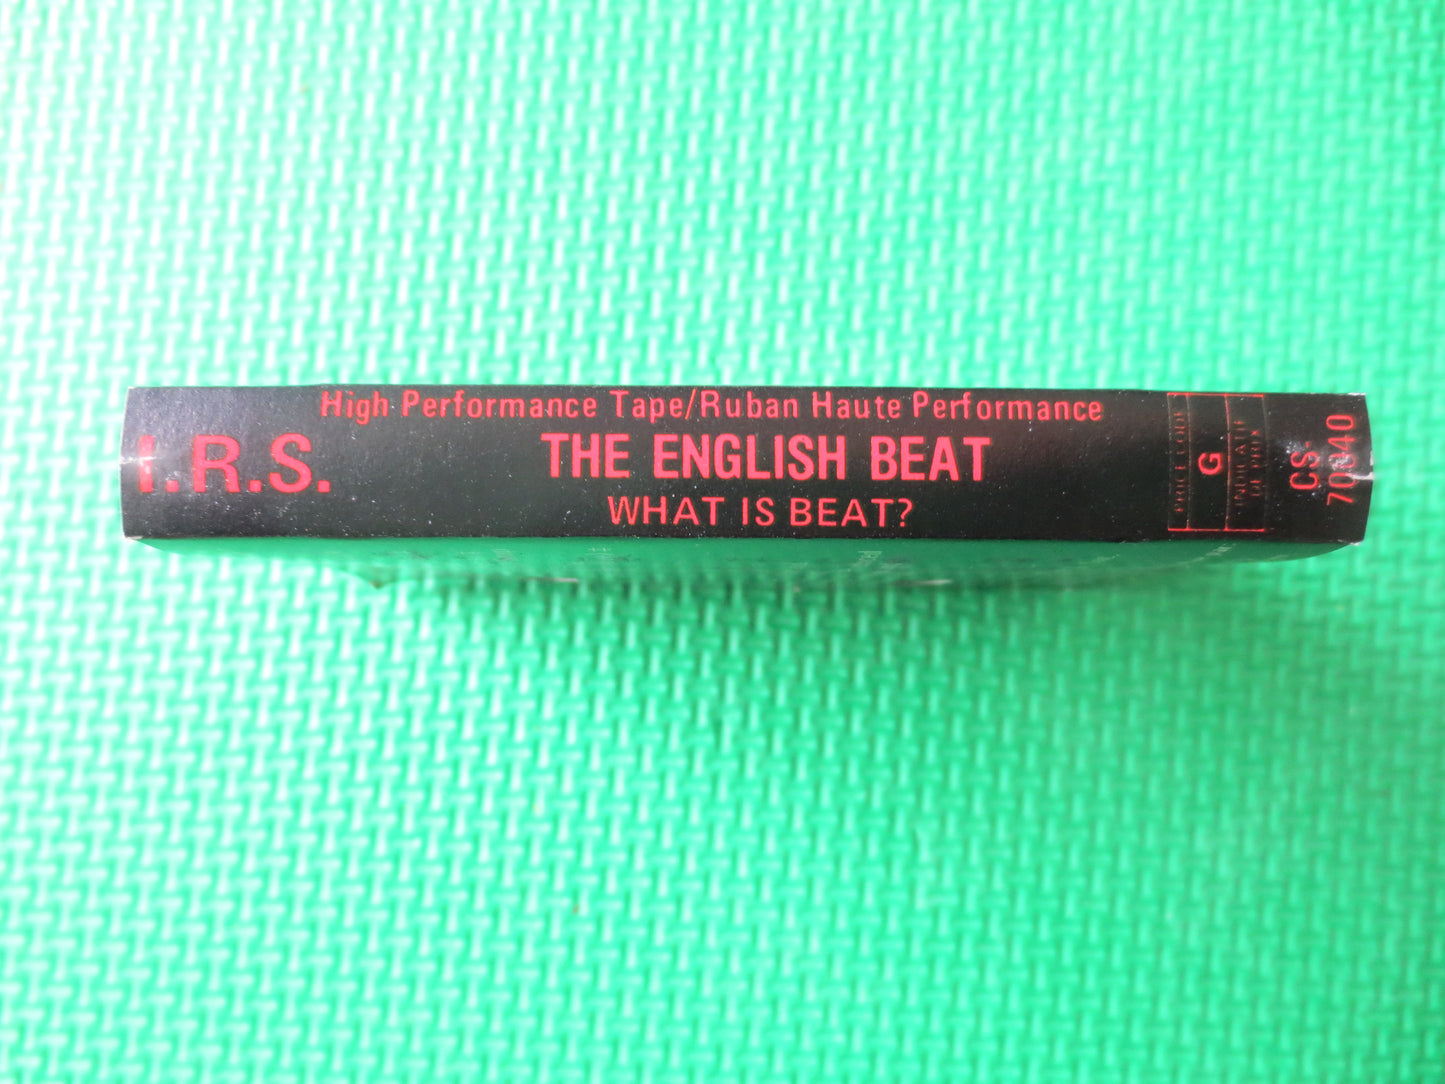 The ENGLISH BEAT, What is BEAT?,  The English Beat lp, English Beat Tapes, Reggae Tapes, Reggae Cassettes, 1983 Cassette